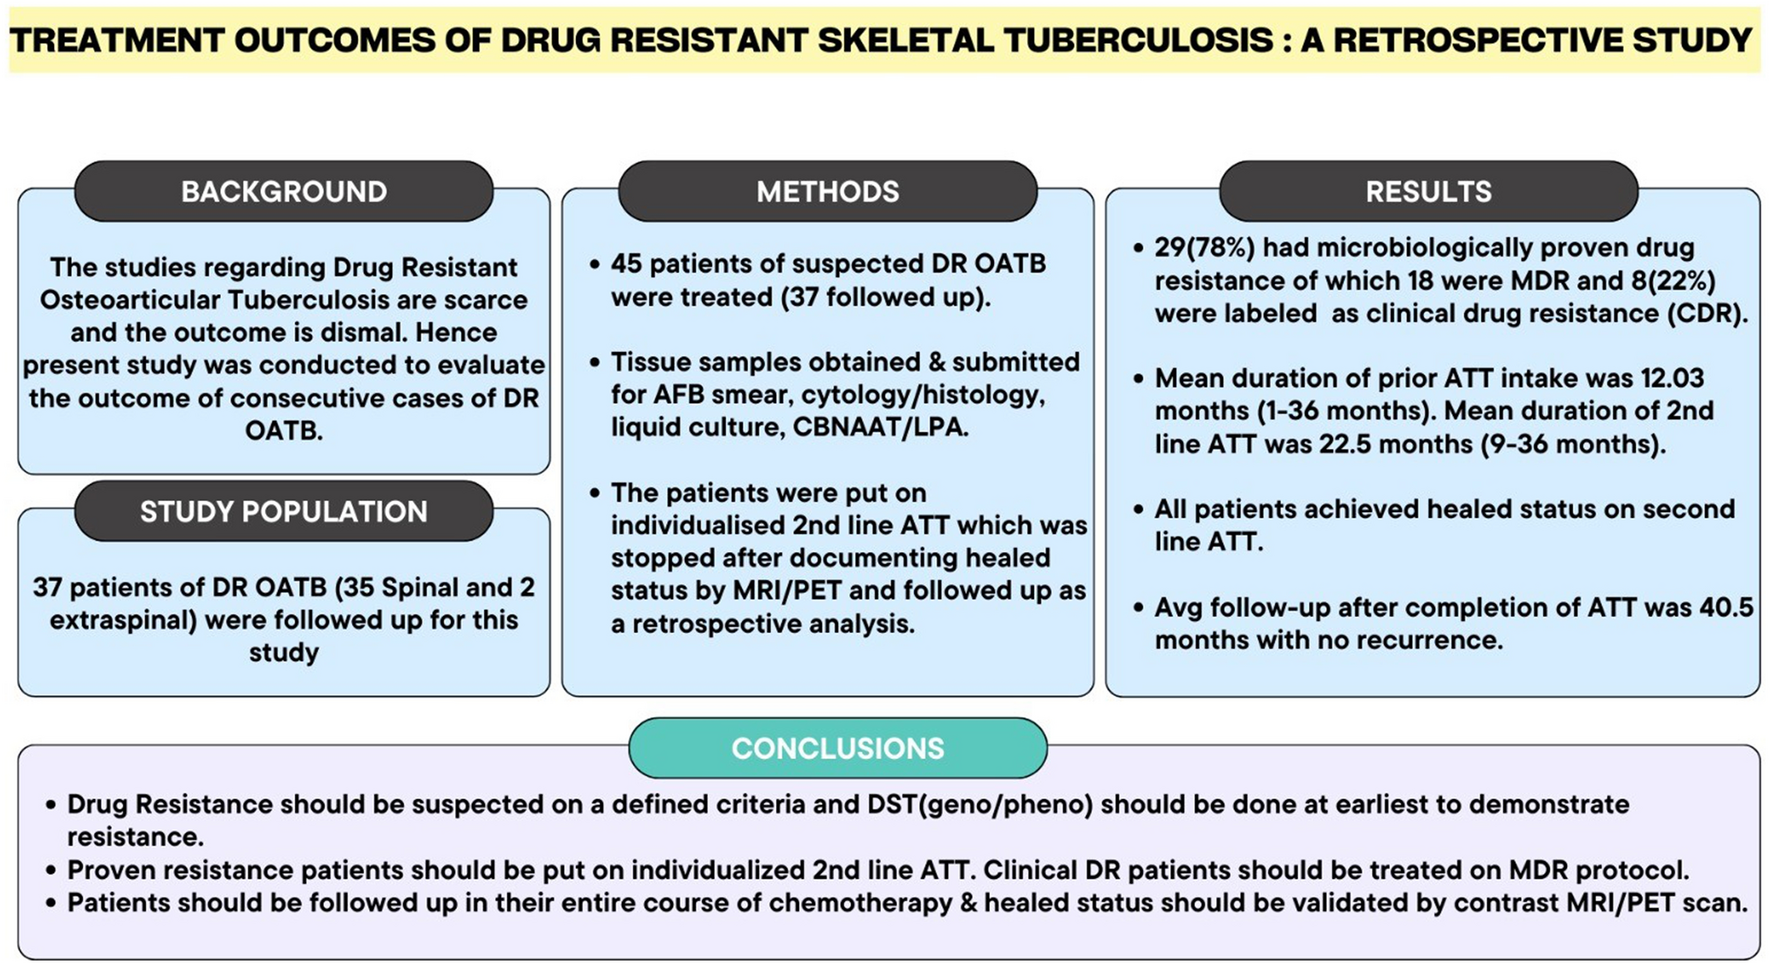 Treatment Outcome of Drug-Resistant Skeletal Tuberculosis: A Retrospective Analysis